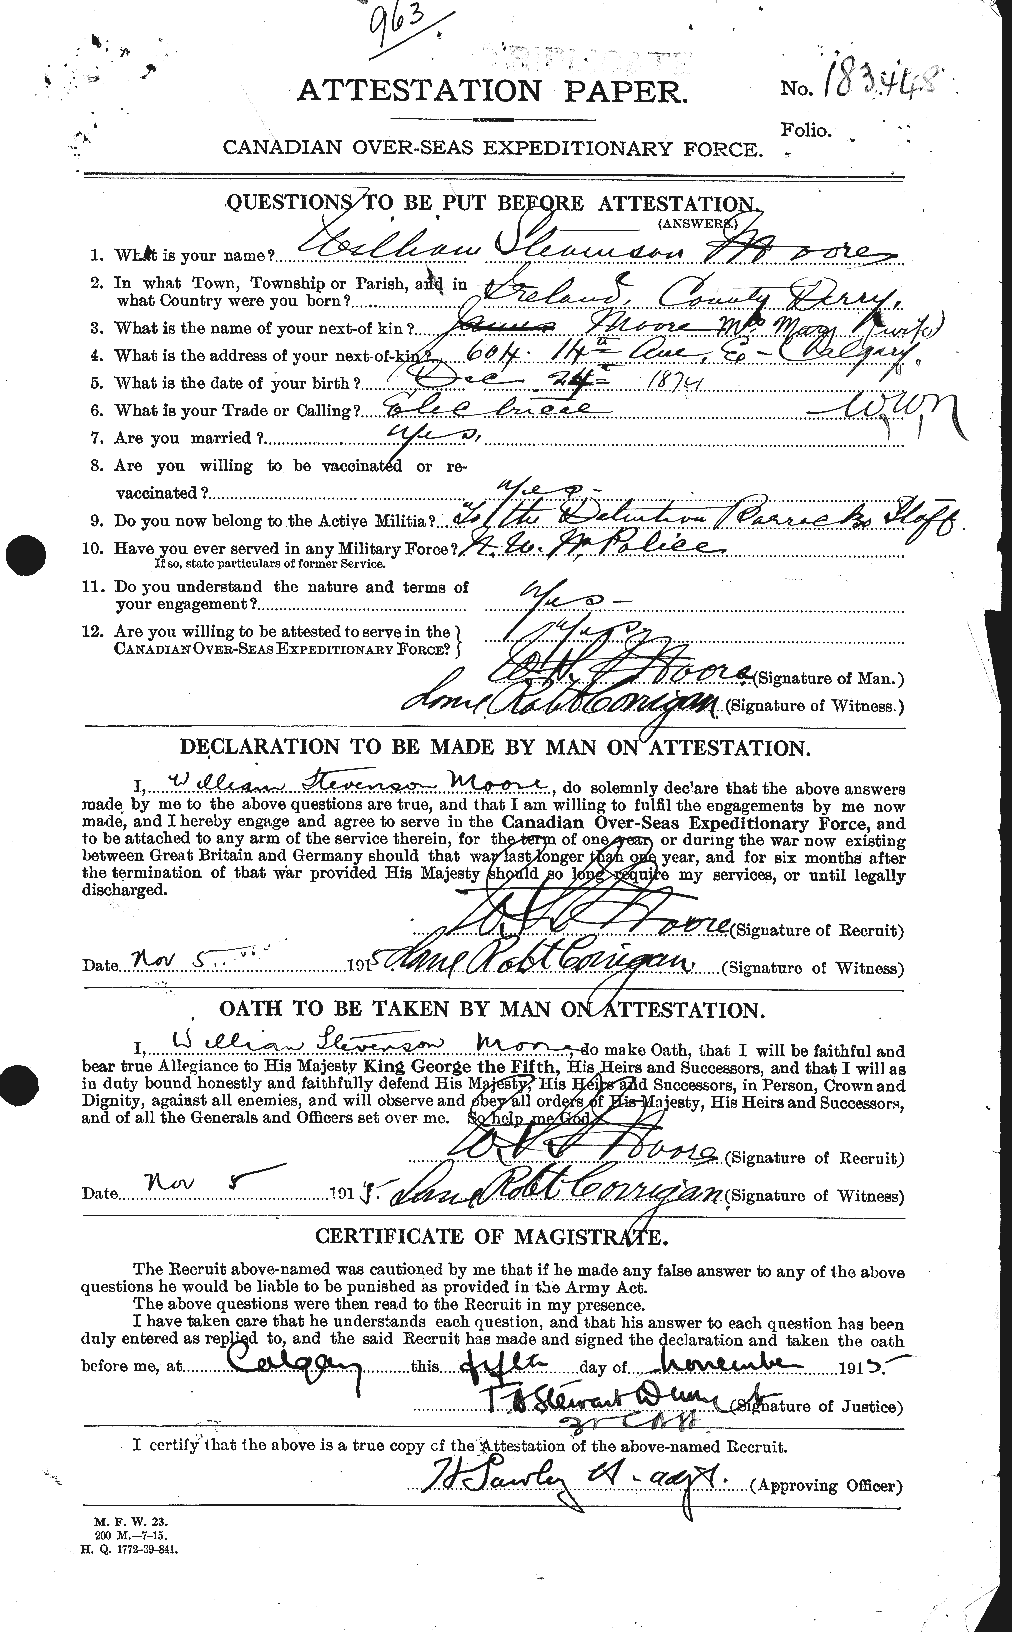 Personnel Records of the First World War - CEF 505871a